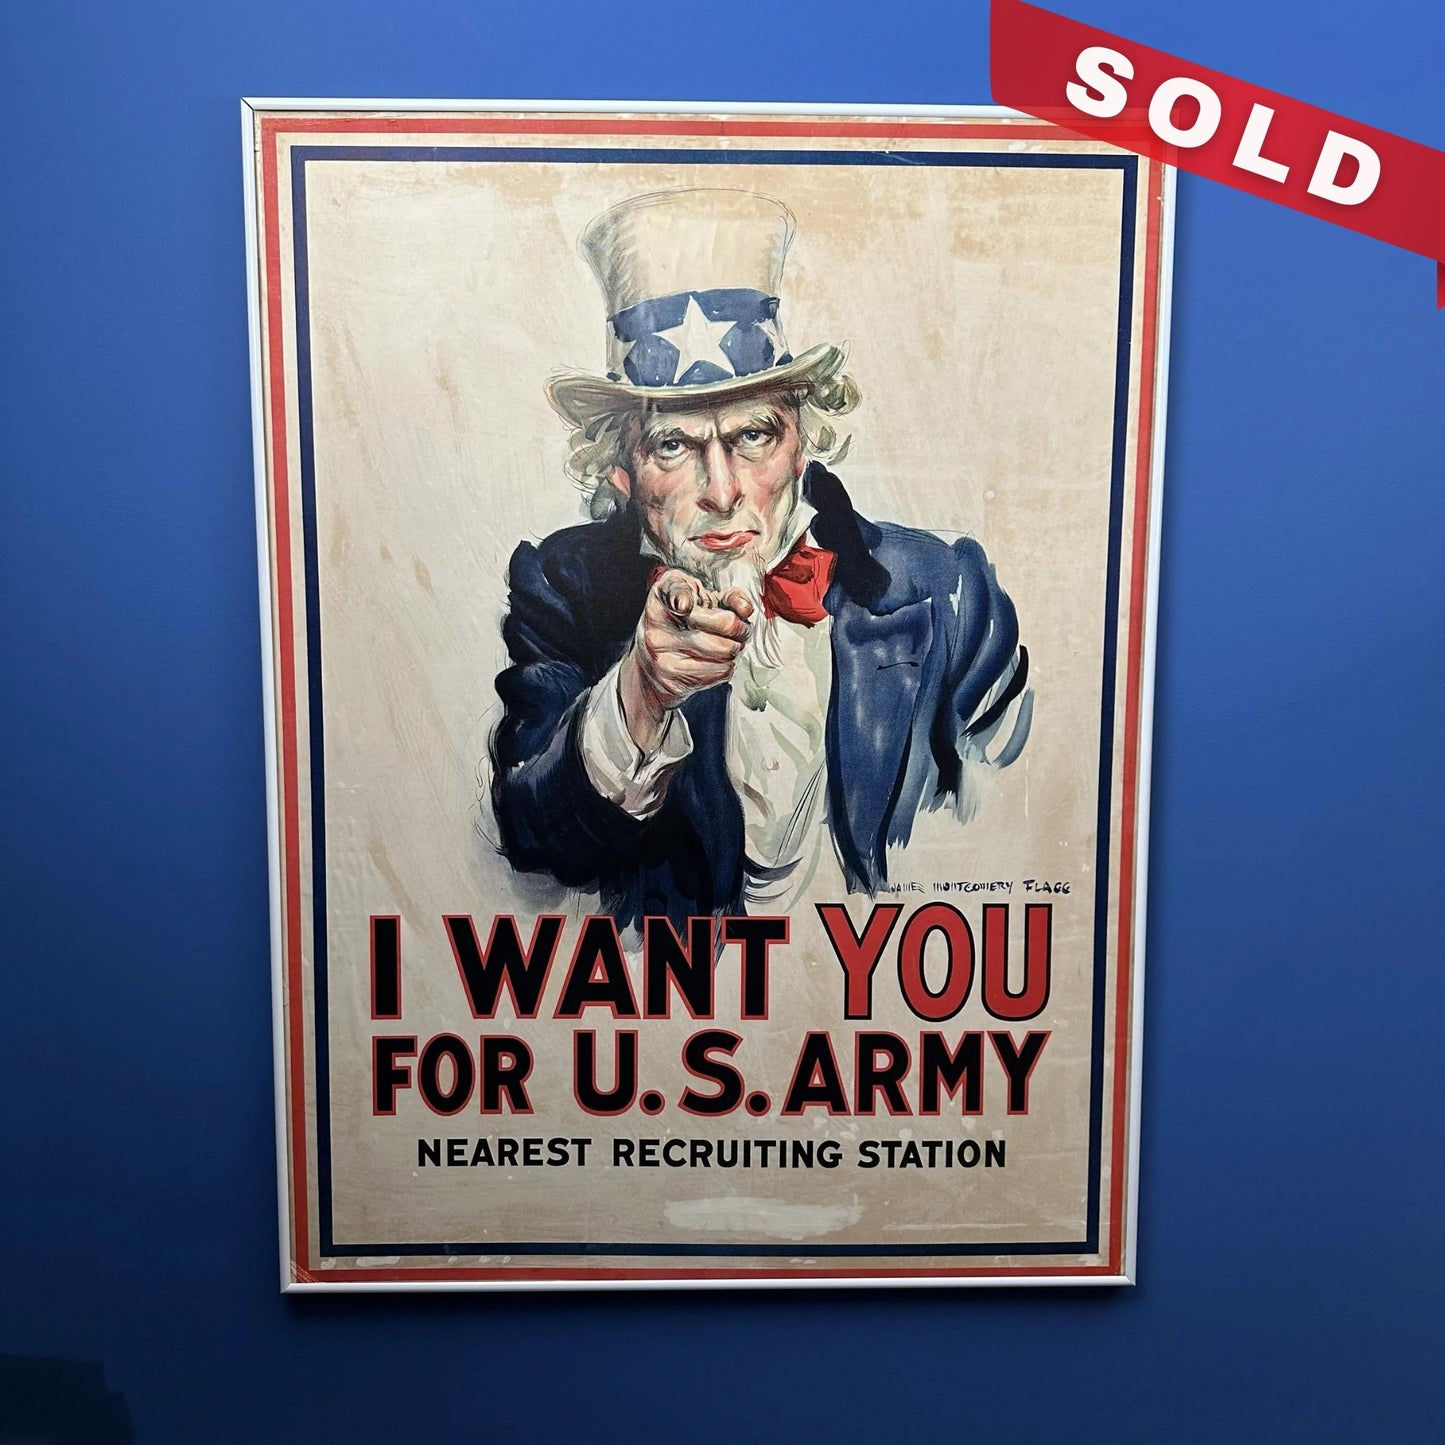 Original 1917 WWI recruiting poster — "I Want You" — Framed